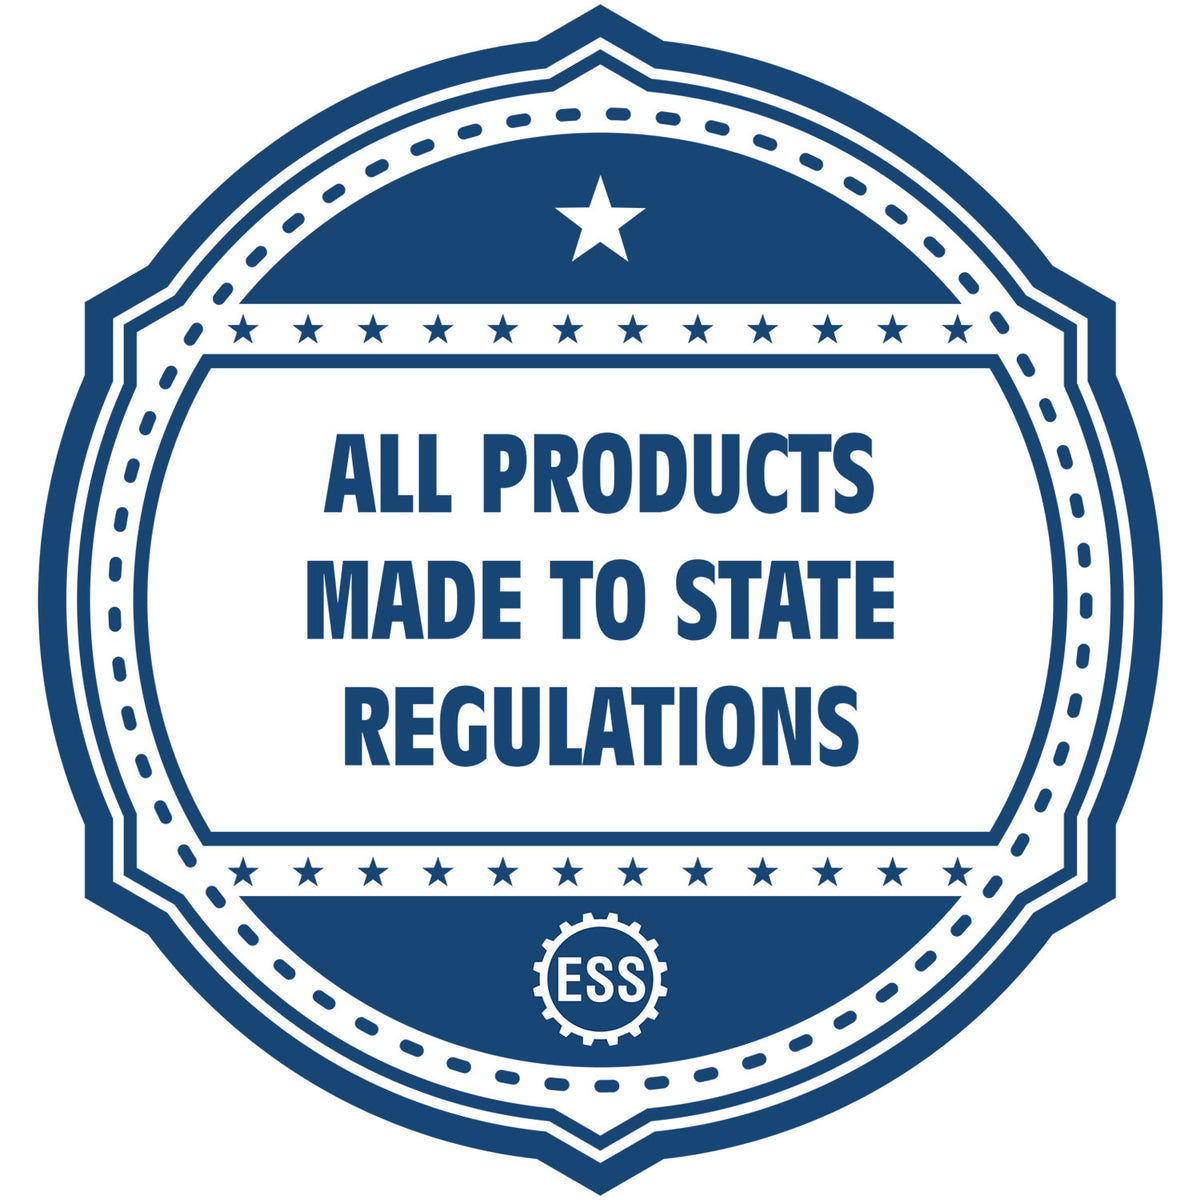 An icon or badge element for the Digital North Dakota Landscape Architect Stamp showing that this product is made in compliance with state regulations.